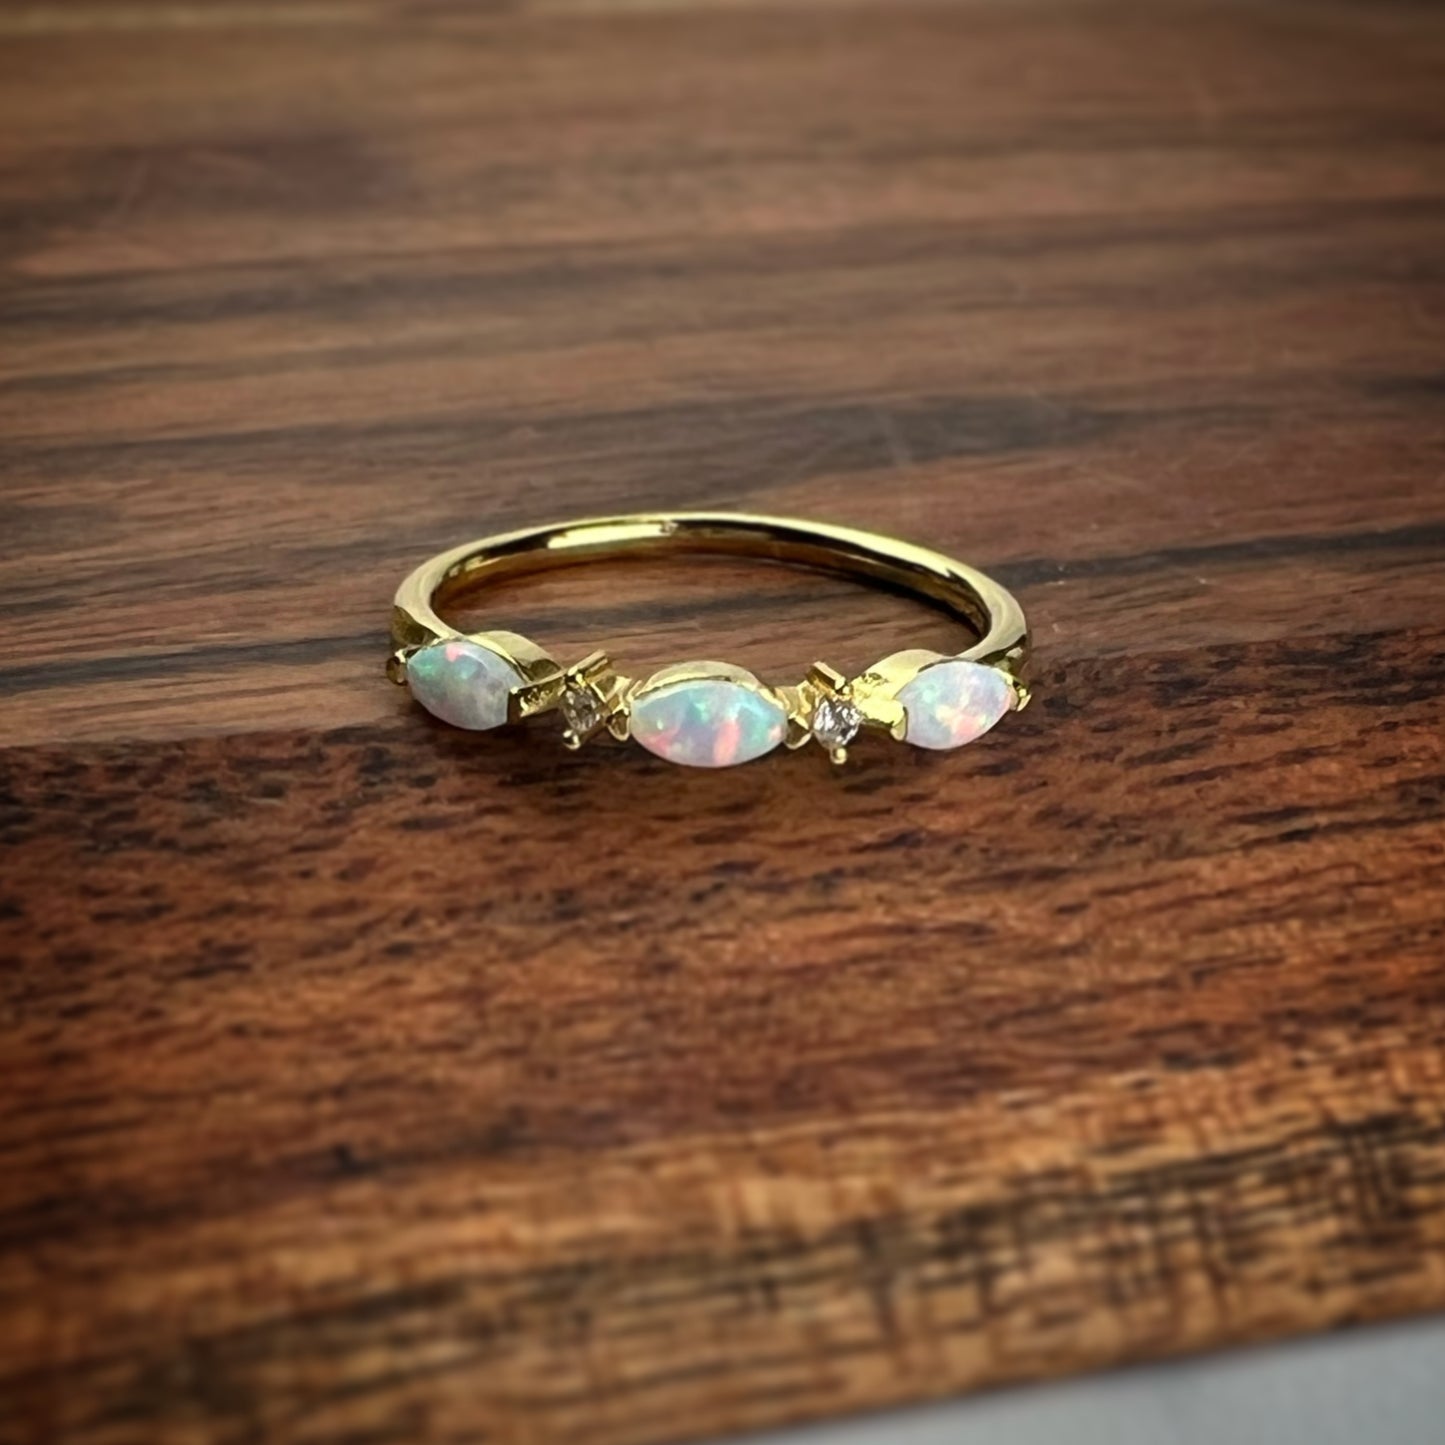 Gold-Plated Opal Ring with Ashes or Breast Milk Infused | Cubic Zirconia Accents | Unique Memorial Jewelry